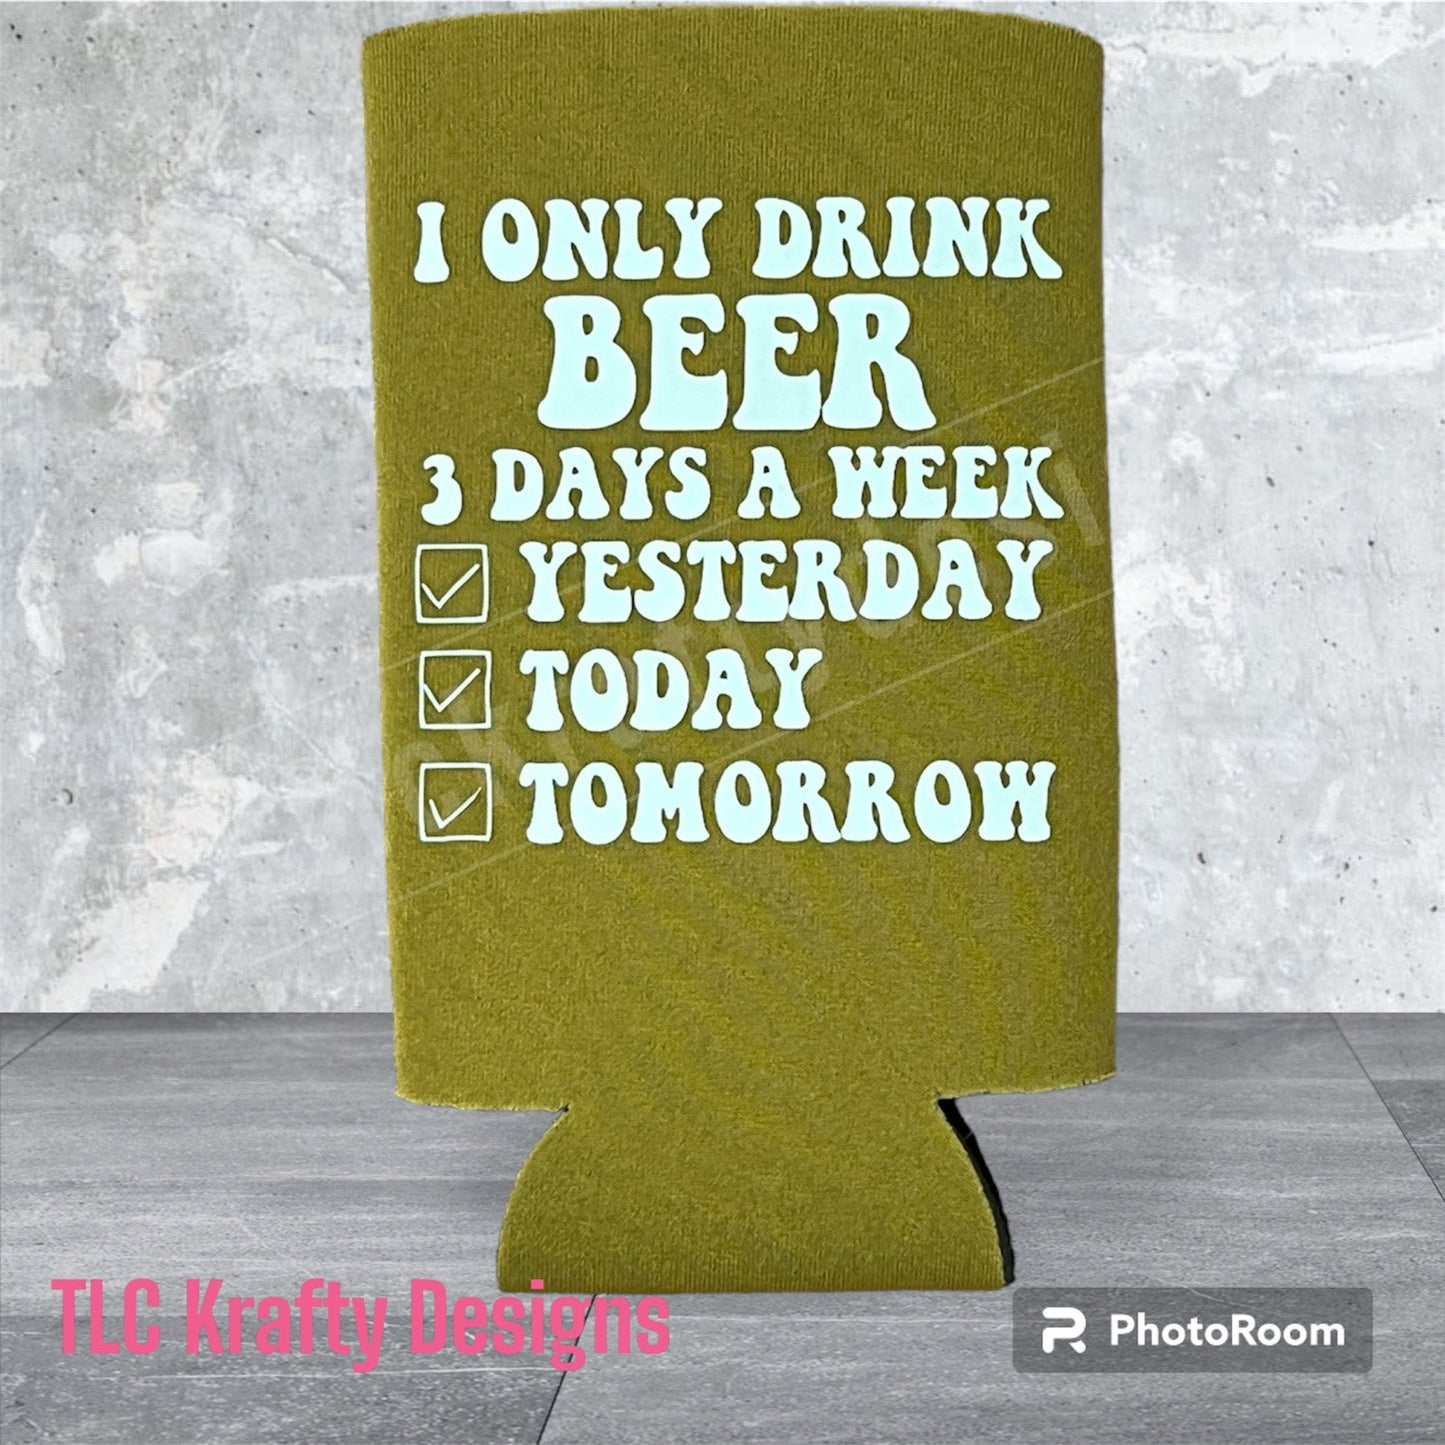 I Only drink beer 3 days of the week Yesterday, Today, Tomorrow Customized Standard Koozie Can holder